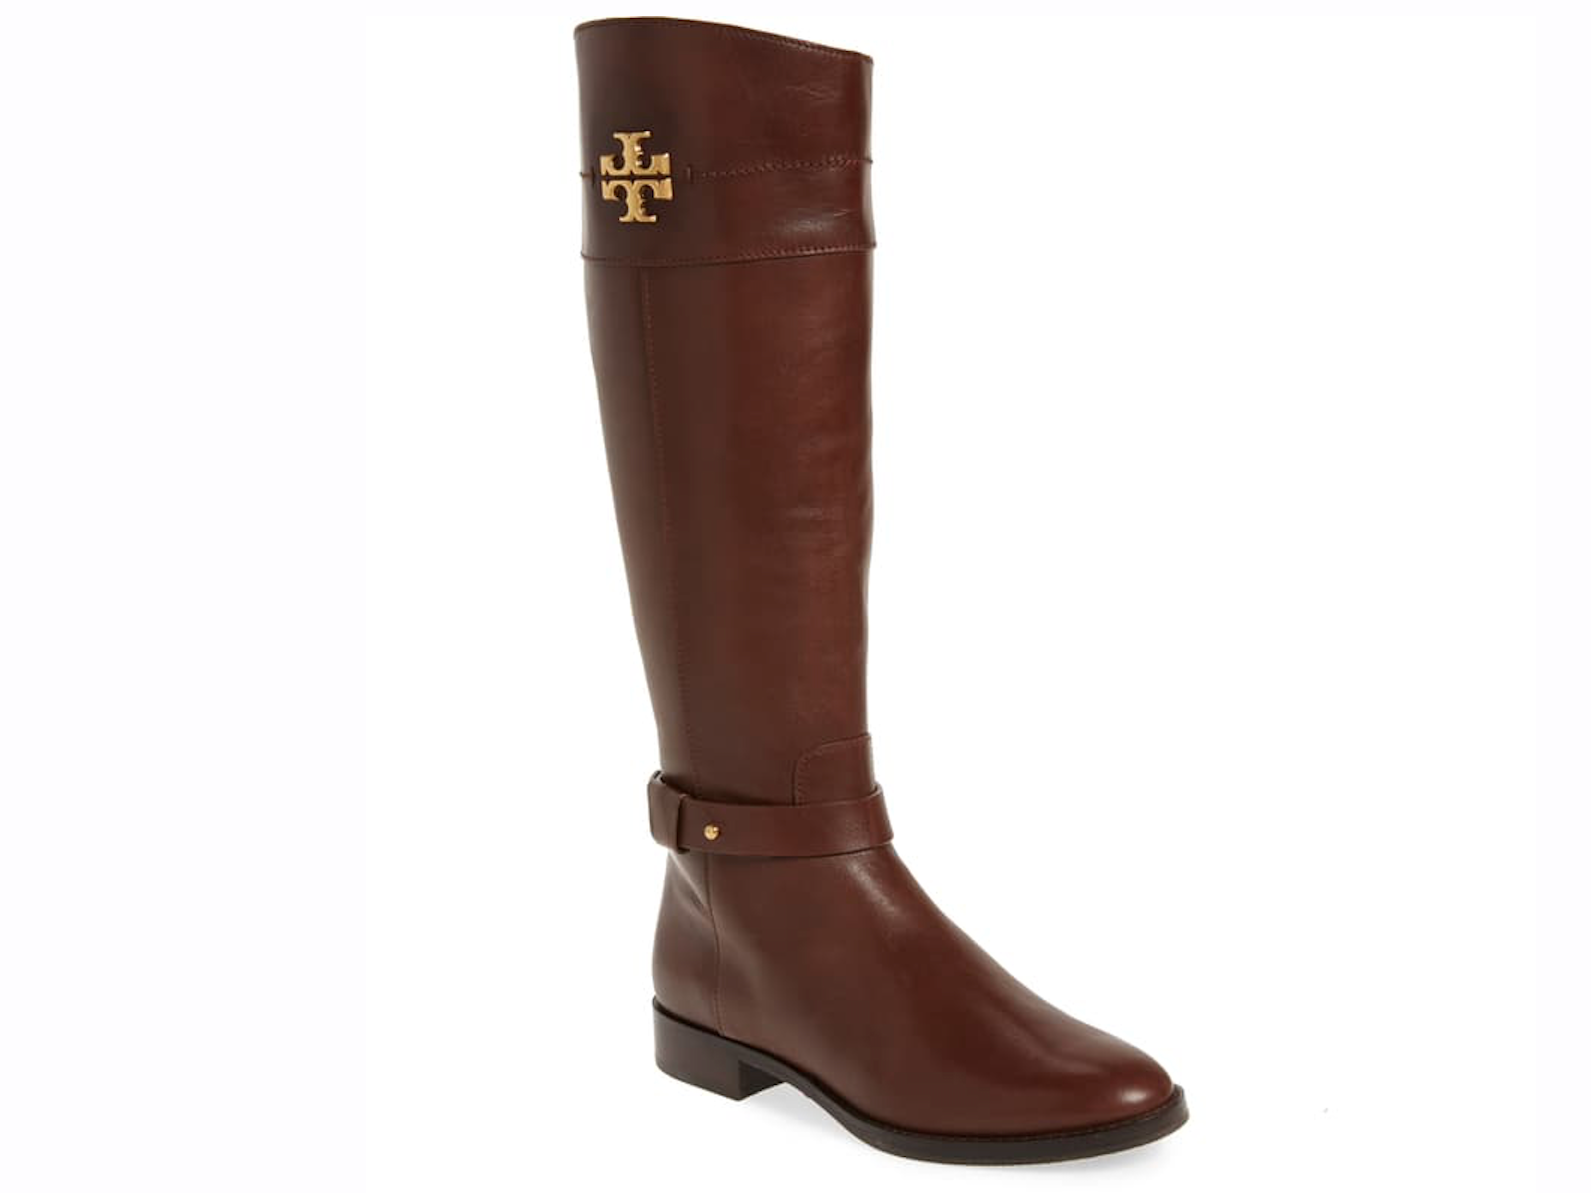 Tory Burch Everly Riding Boot 